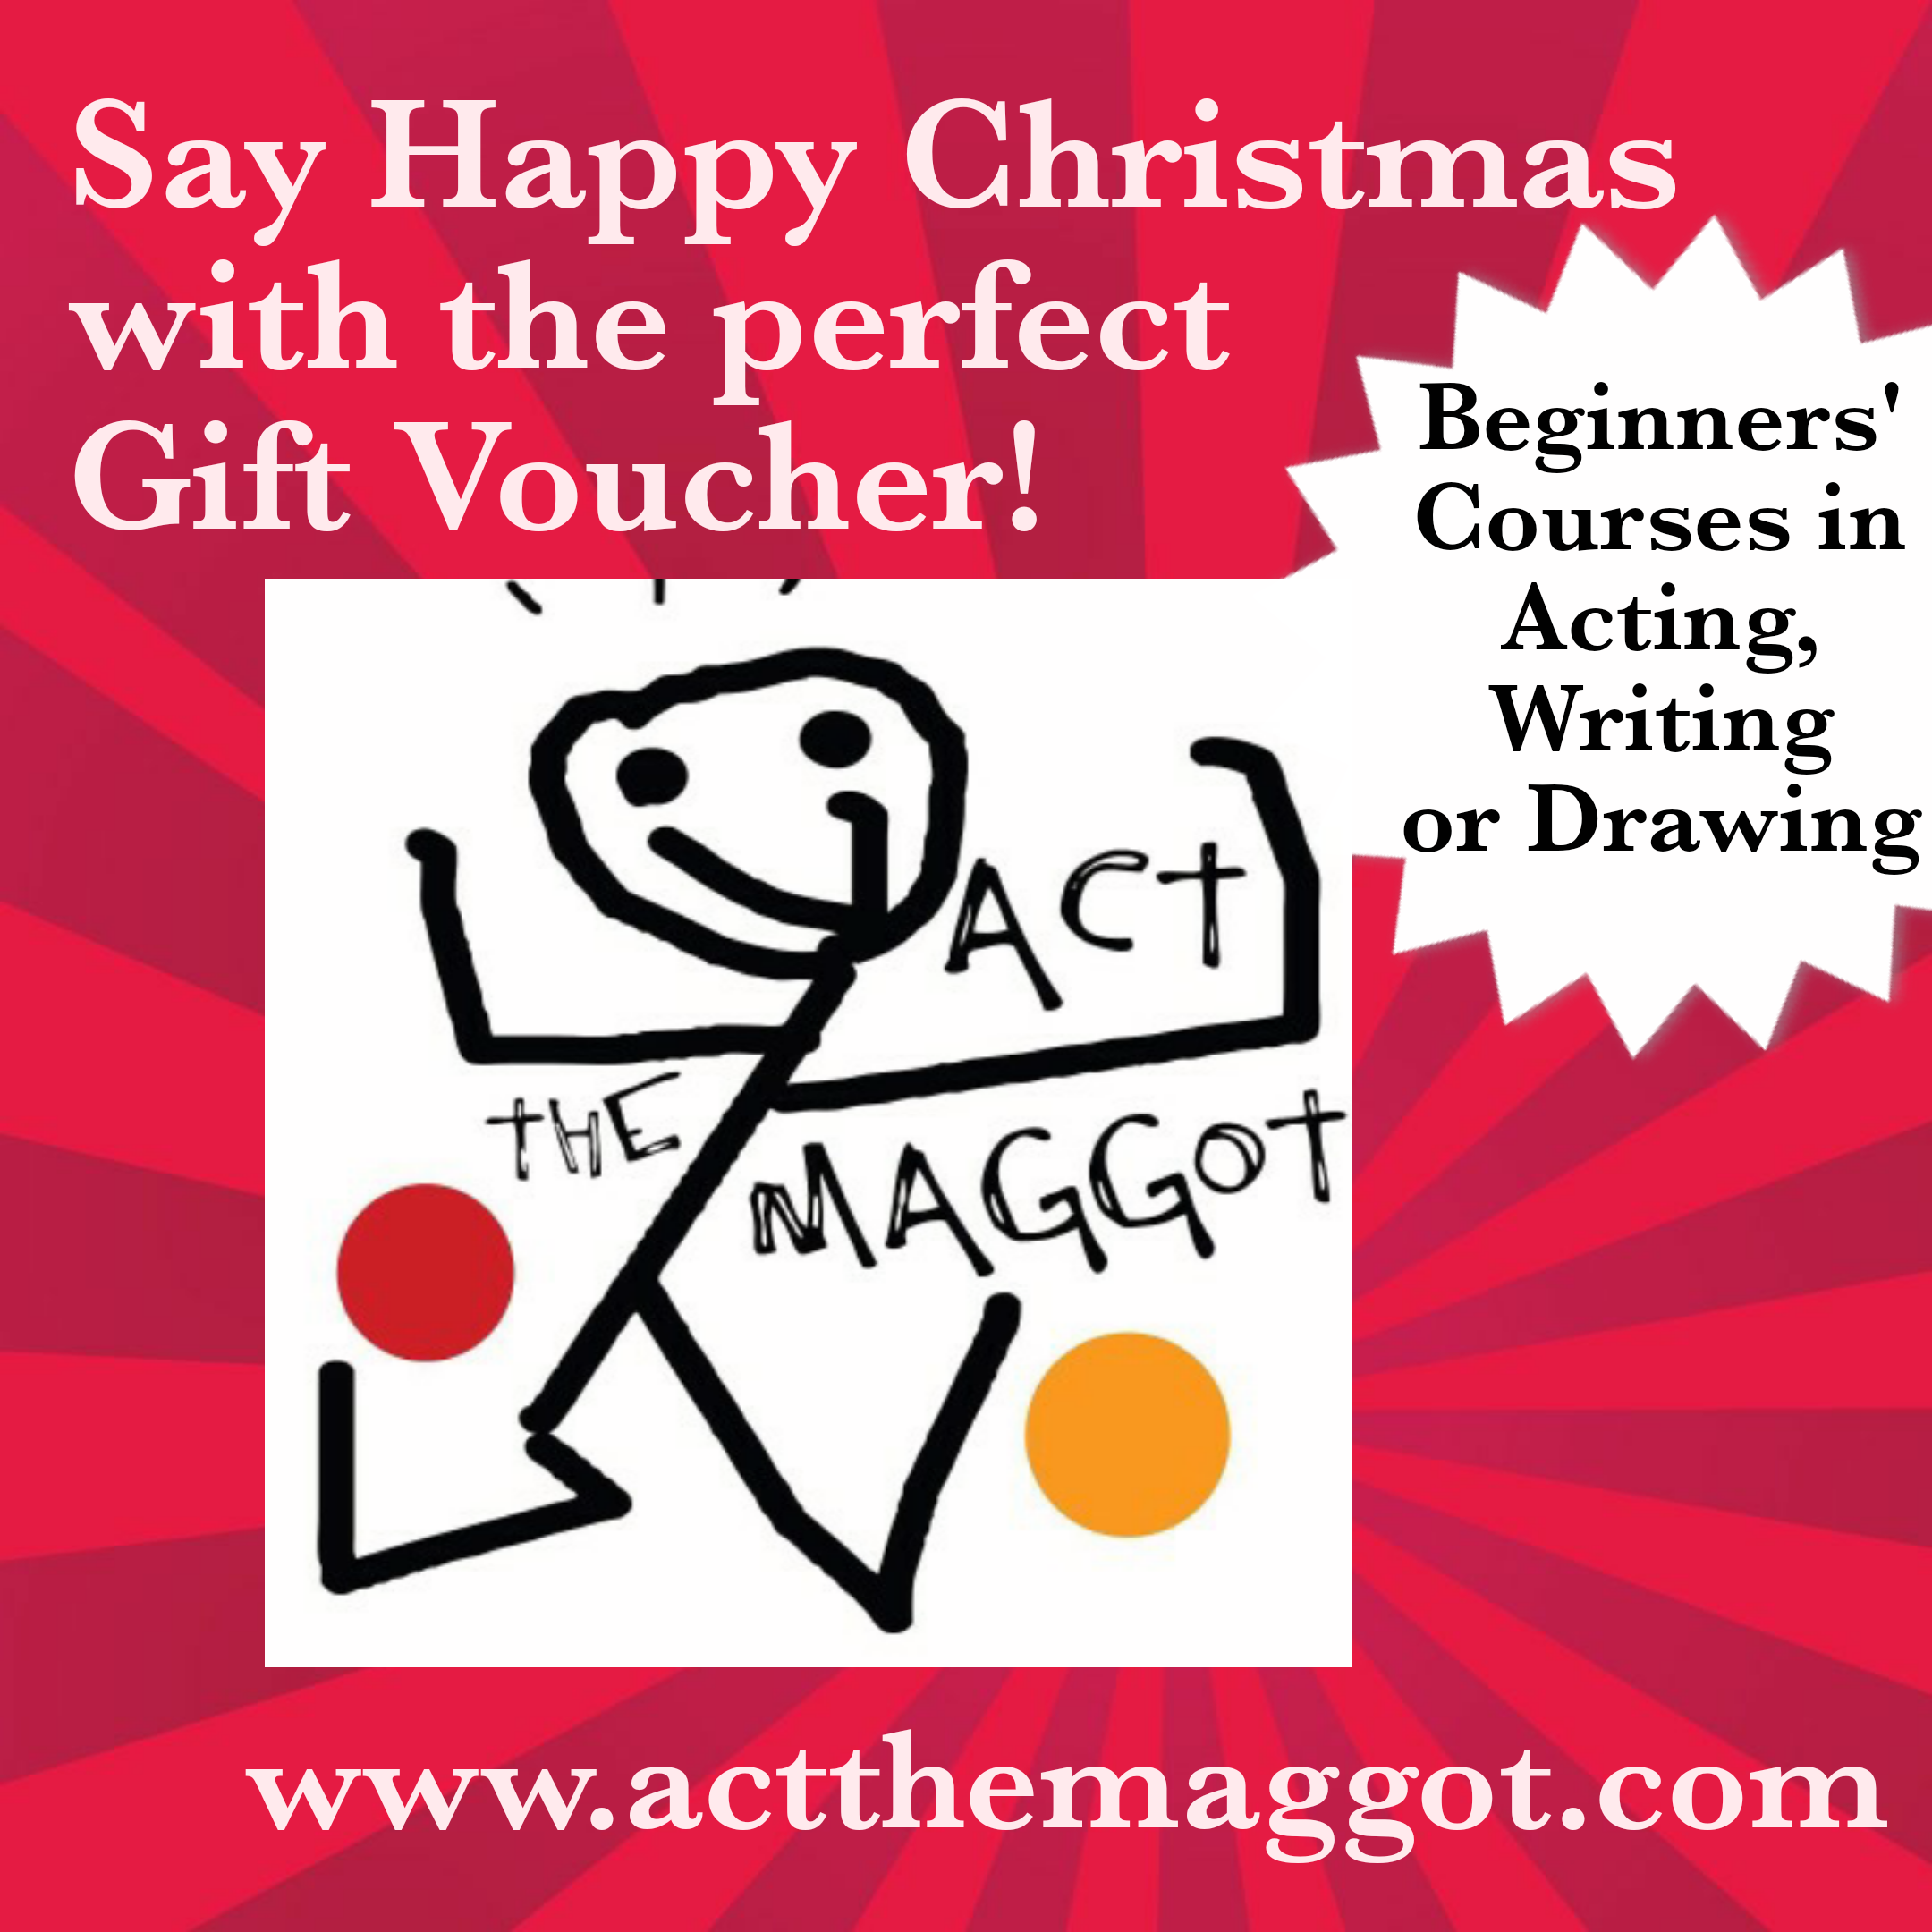 acting-beginners-drawing-creative-writing-christmas-voucher